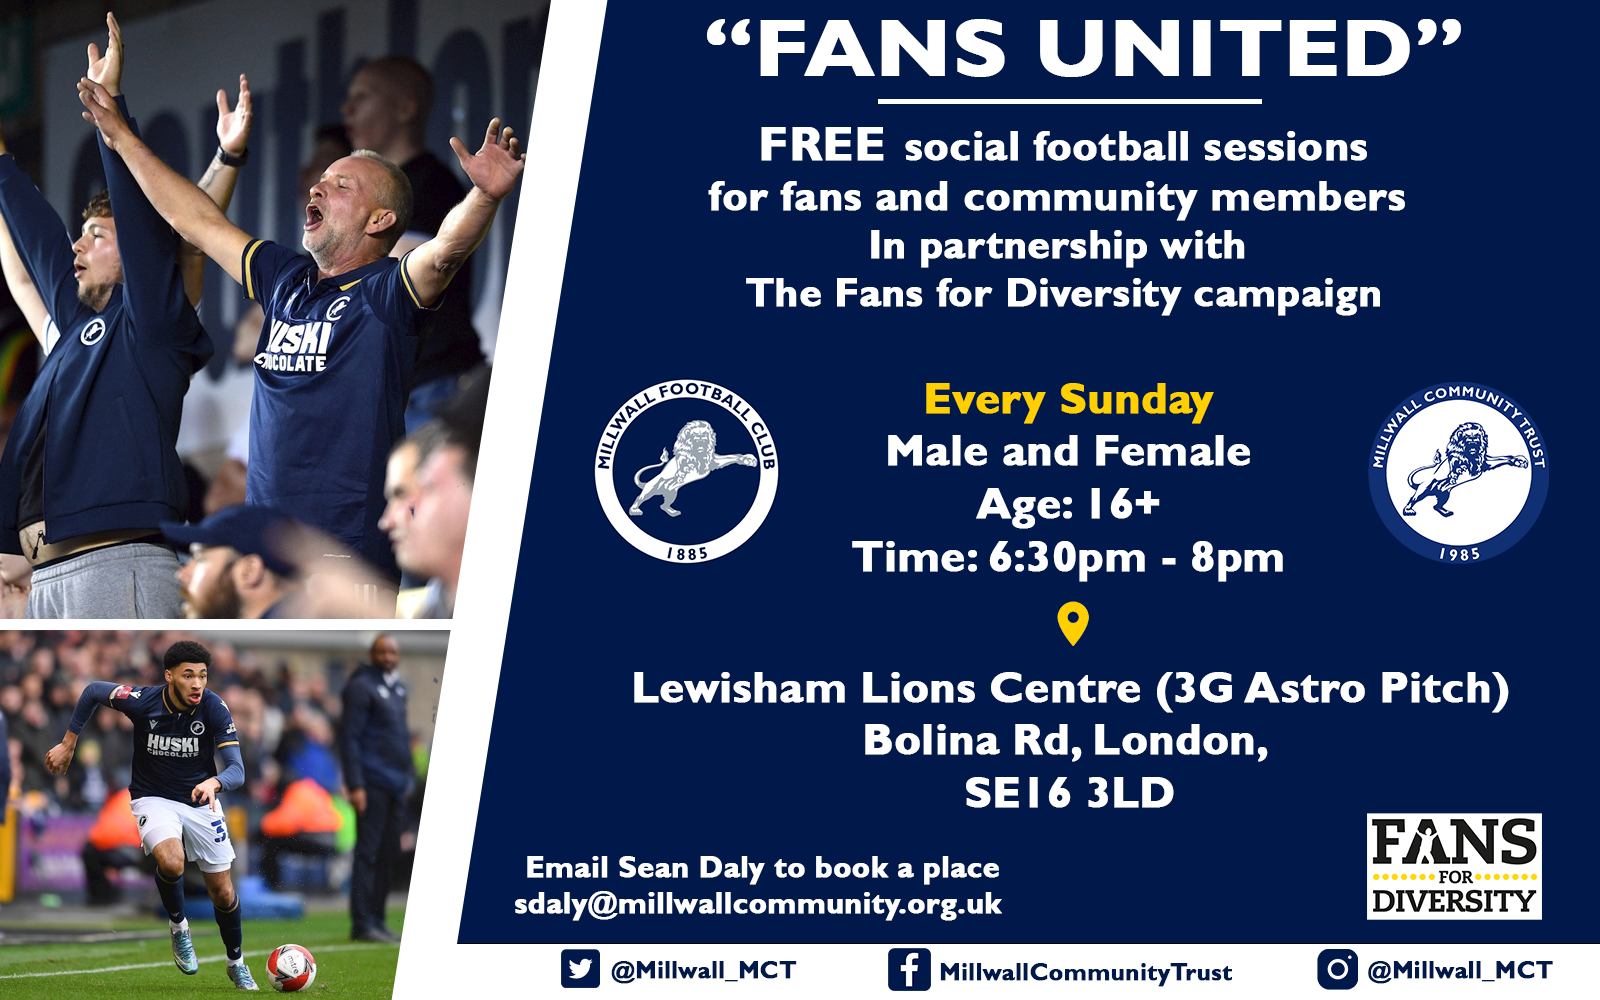 Millwall Community Trust Launch FREE “Fans United” Social Football Sessions